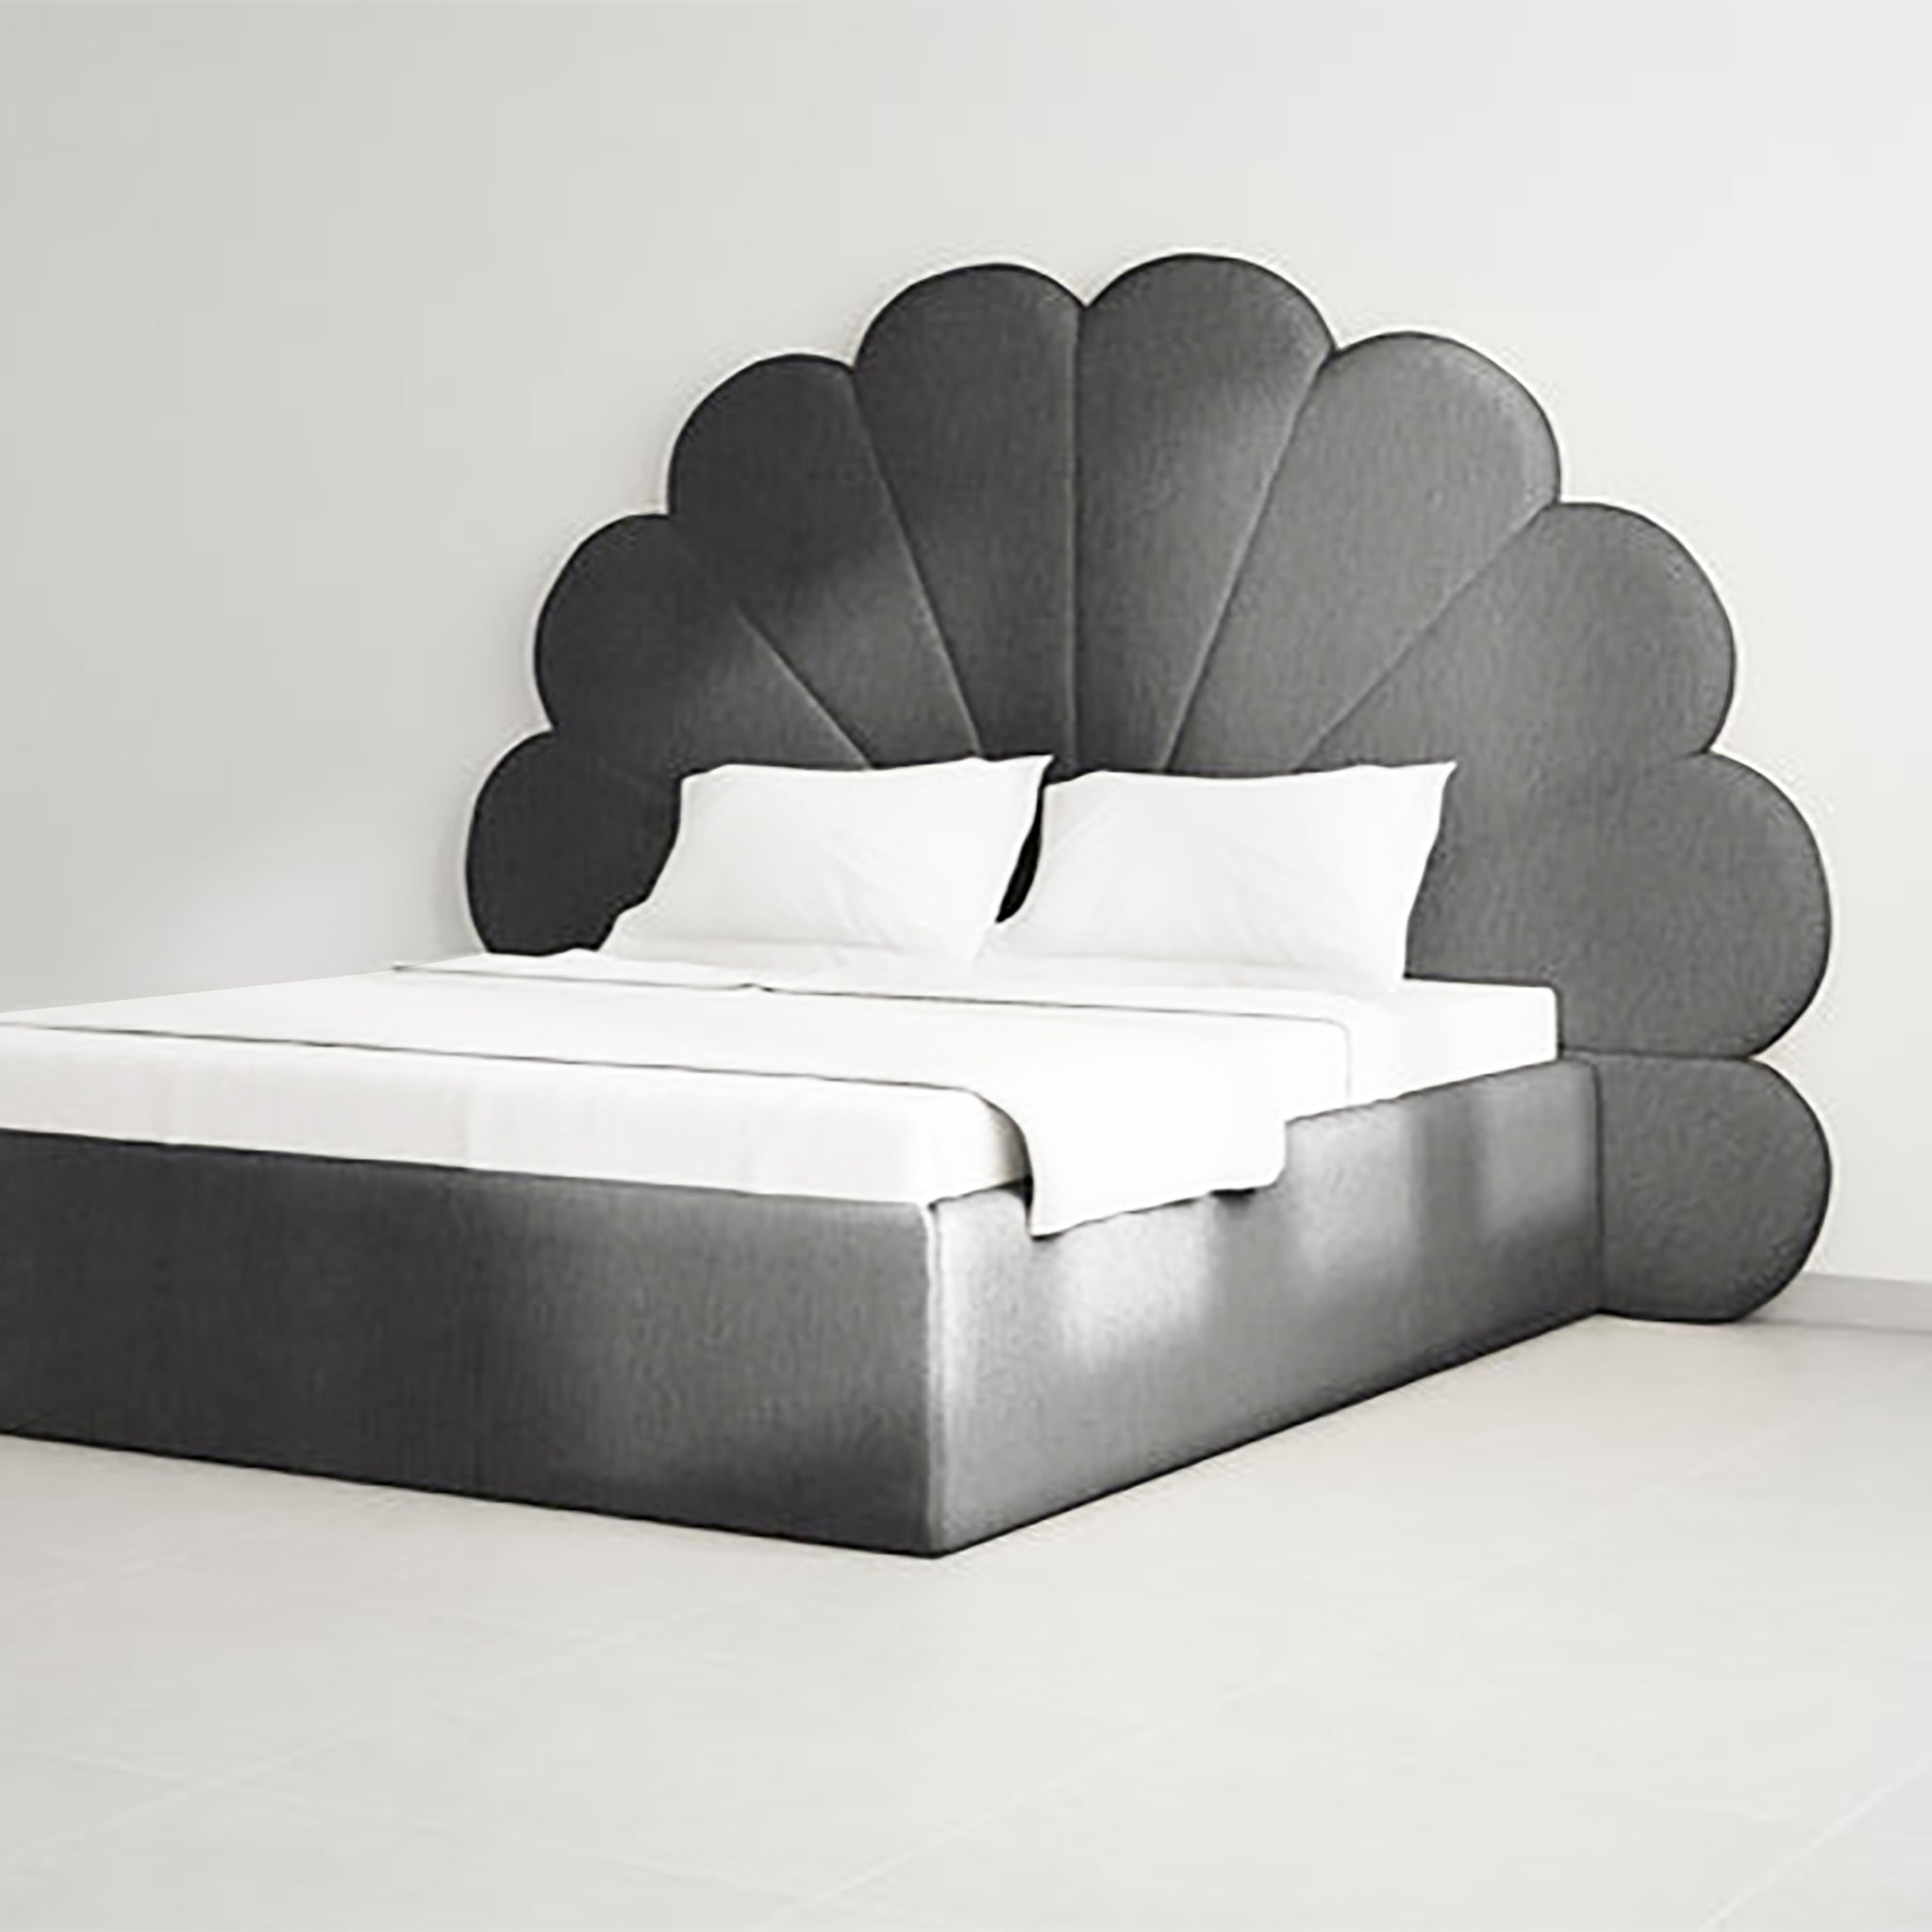 The Kyle Bed with elite design and customizable options